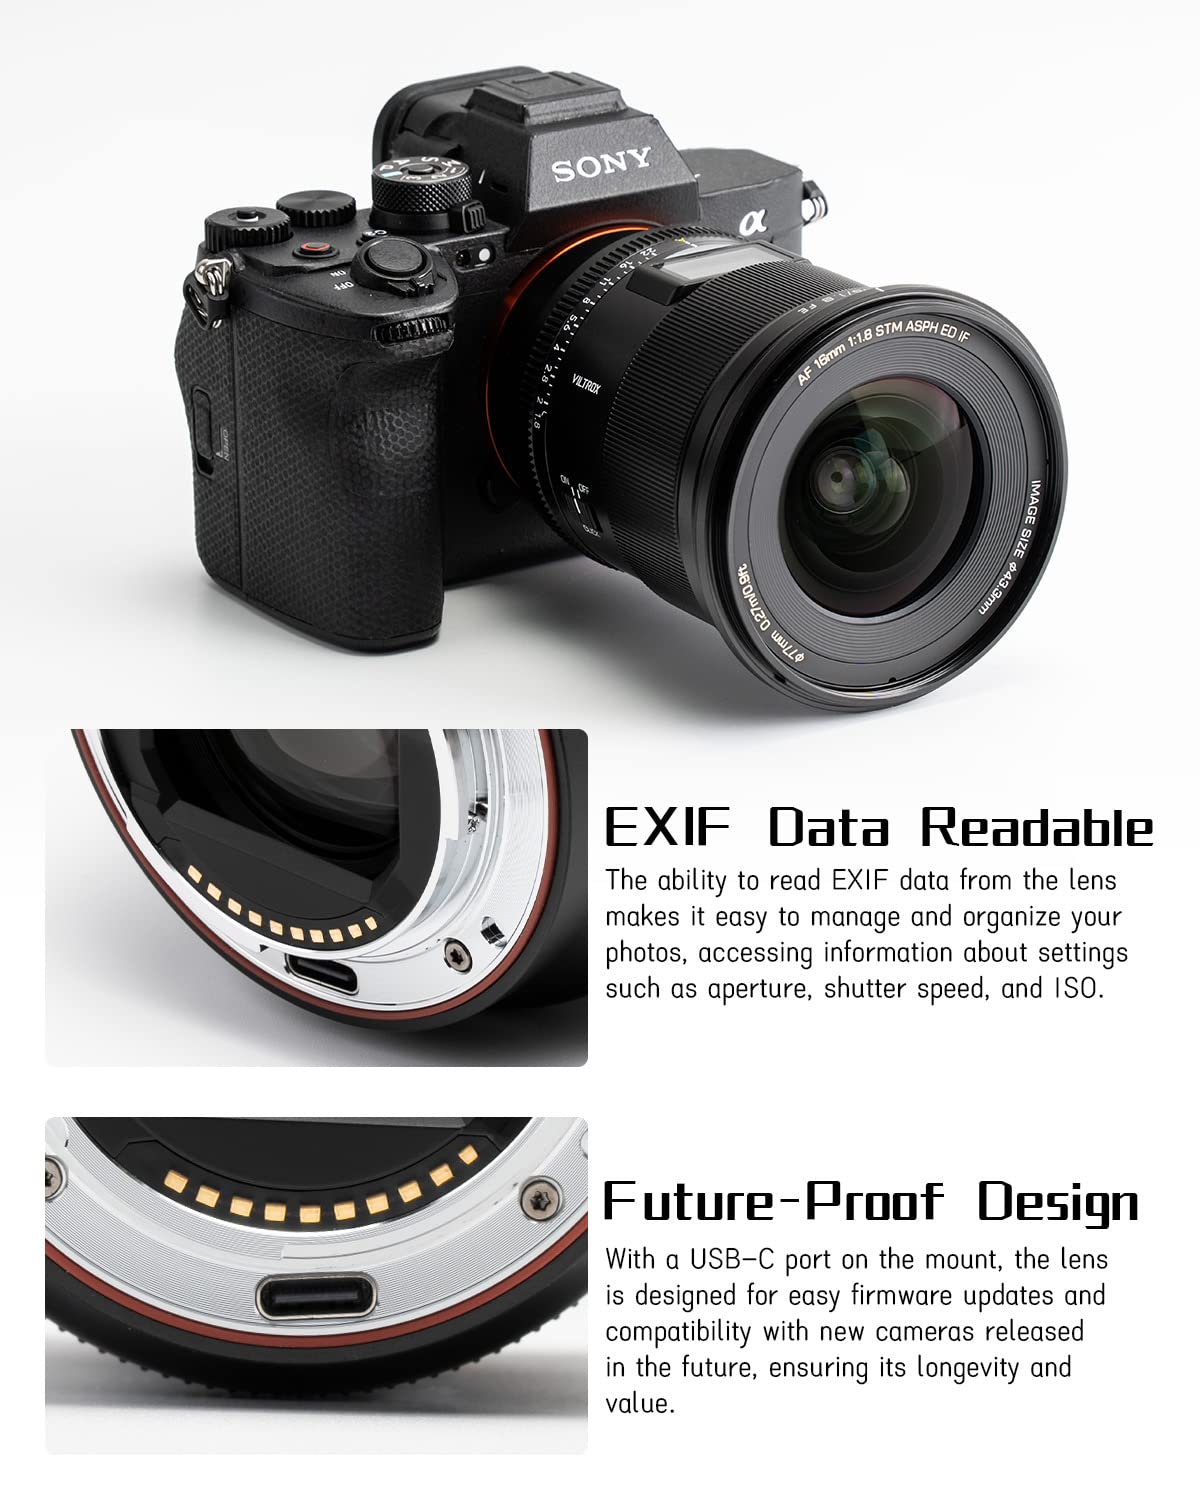 Viltrox 16mm F1.8 Pro Level Wide Angle Autofocus Lens with LCD Screen, Compatible with Full-Frame Sony E-Mount Mirrorless Cameras Alpha a7 a7II a7III a7R a7RII a7RIII a7RIV a7S a7SII a9 a7C